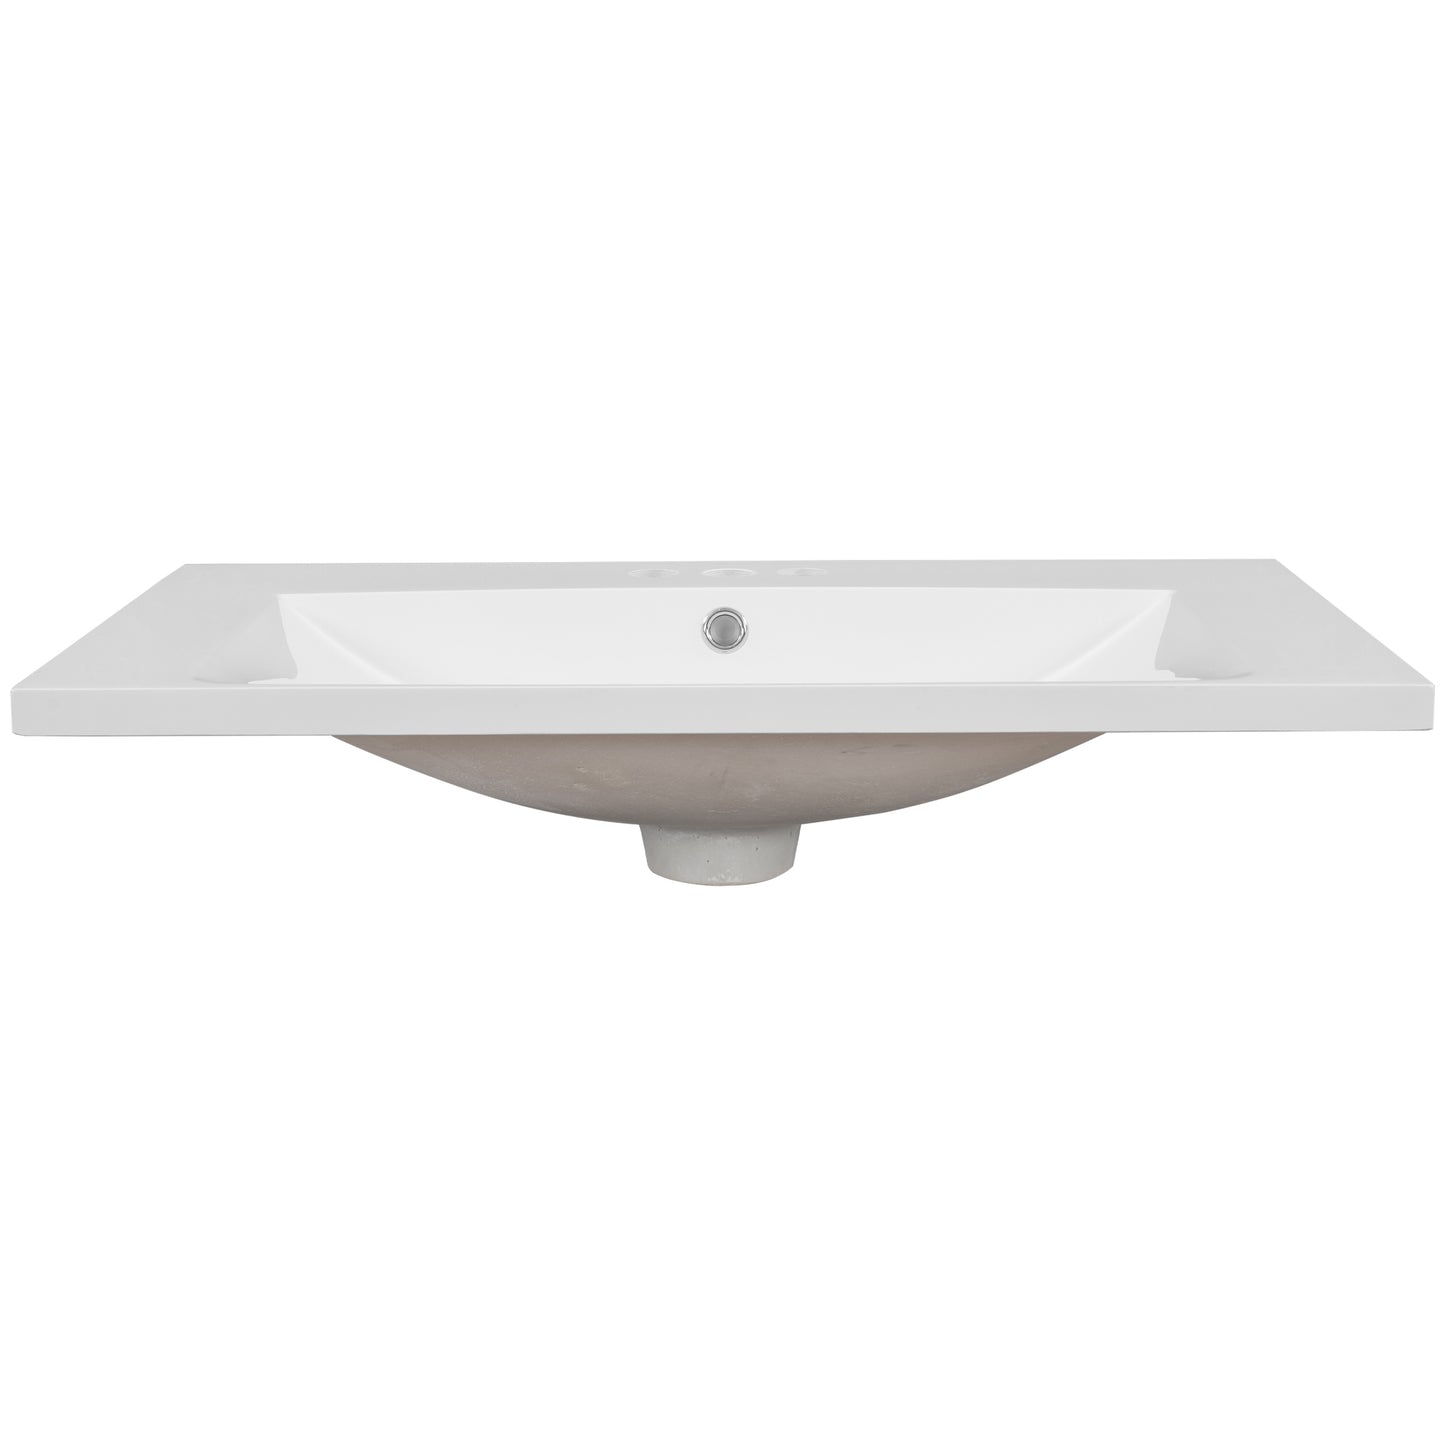 30" Single Bathroom Vanity Top with White Basin, 3-Faucet Holes, Ceramic